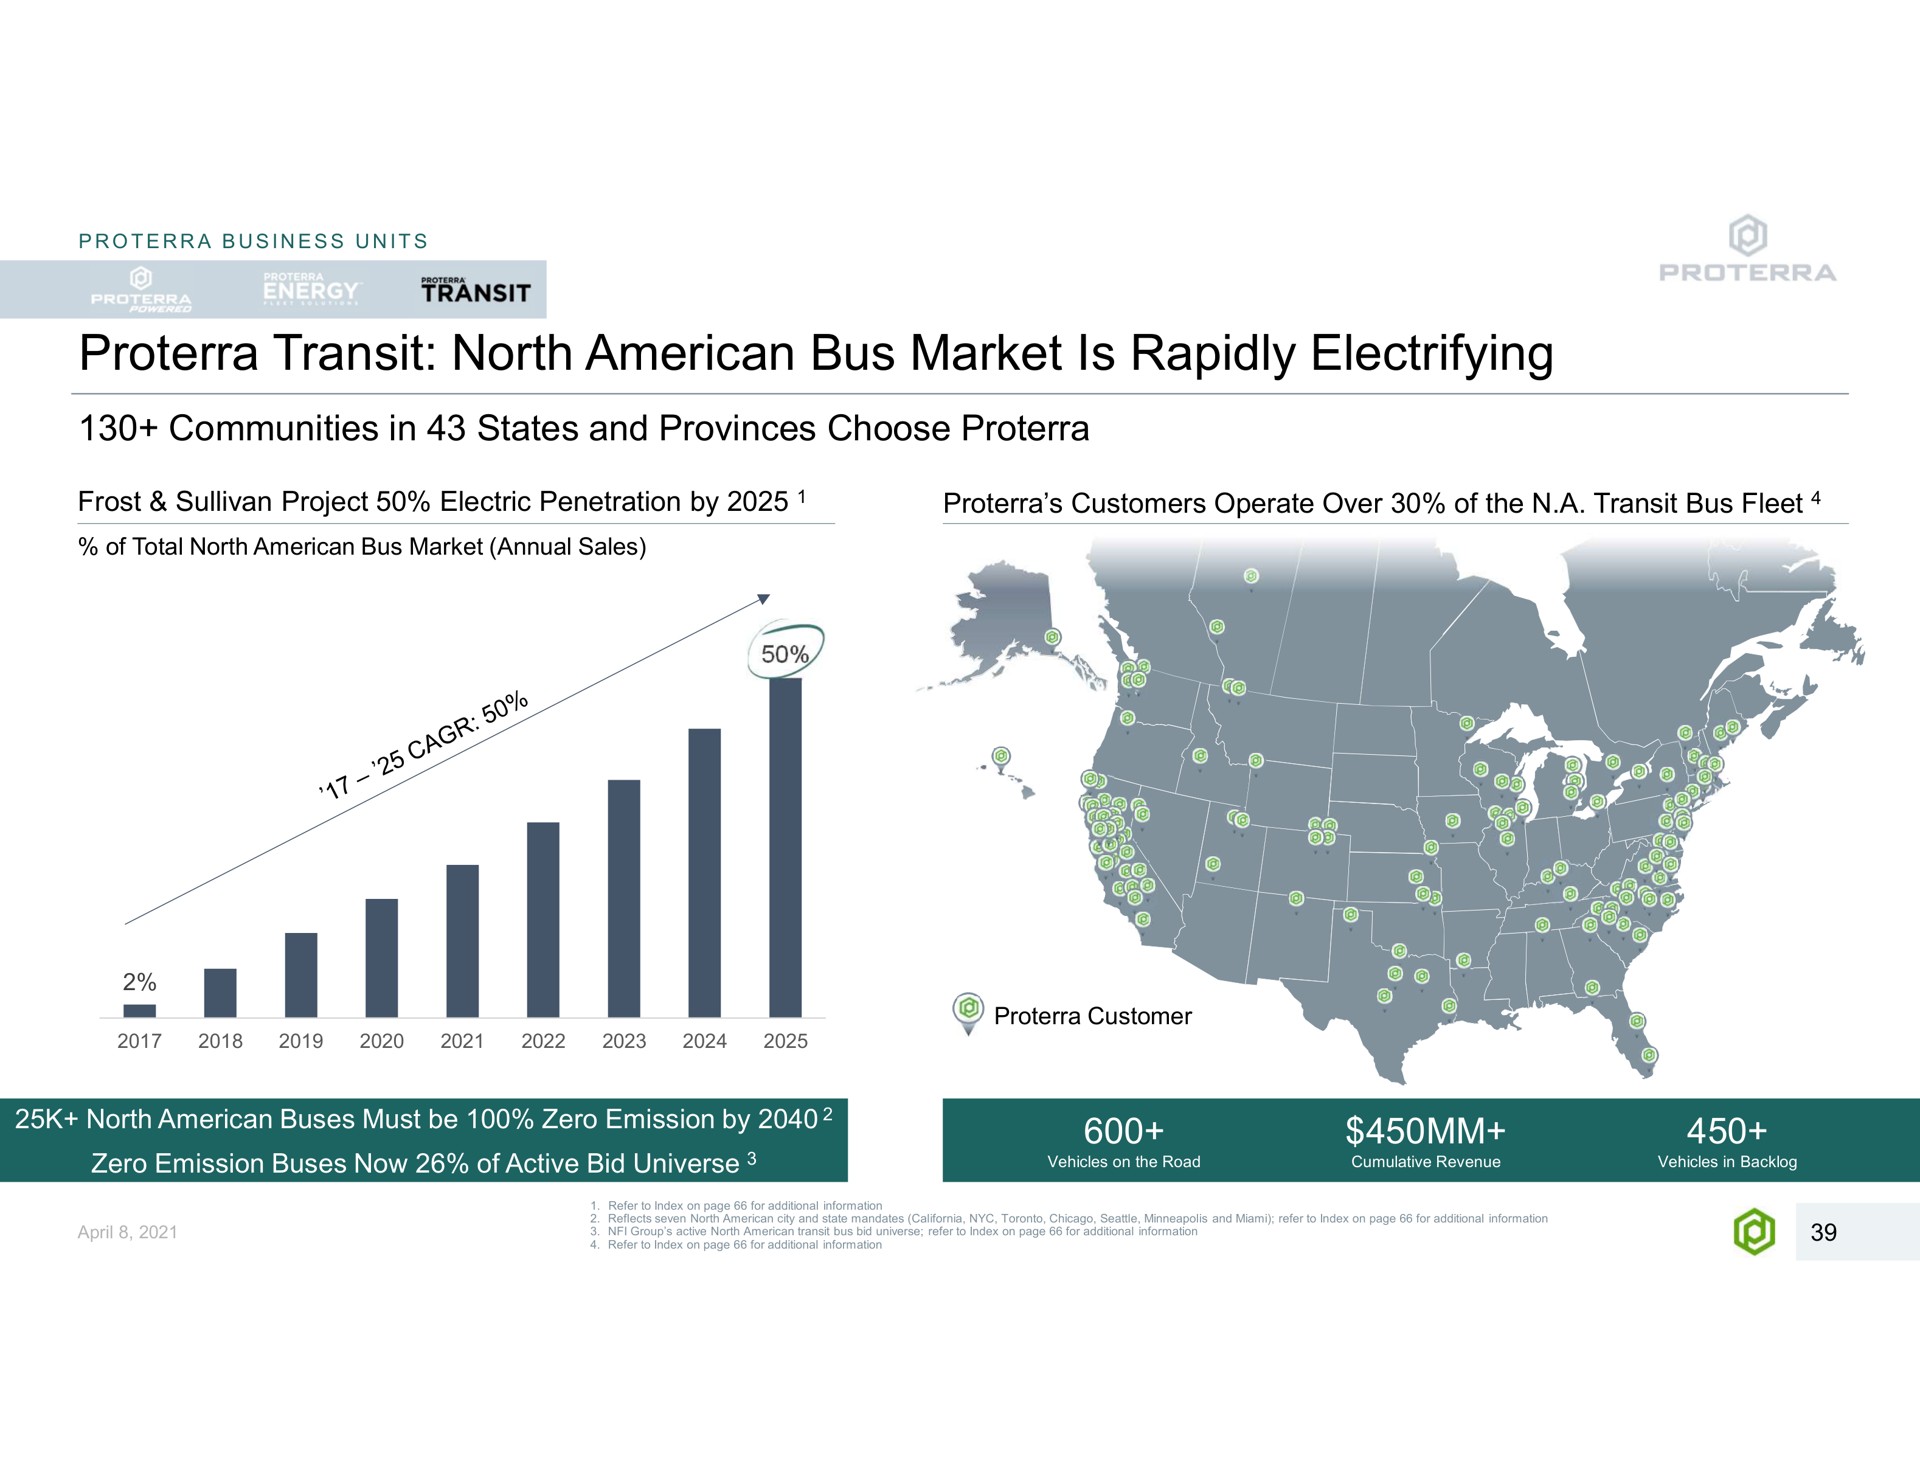 transit north bus market is rapidly electrifying business units communities in states and provinces choose frost project electric penetration by customers operate over of the a fleet of total annual sales customer of buses must be zero emission by zero emission buses now of active bid universe vehicles on the road cumulative revenue vehicles in backlog refer to index on page for additional information reflects seven city and state mandates and refer to index on page for additional information group active bid universe refer to index on page for additional refer to index on page for additional information | Proterra